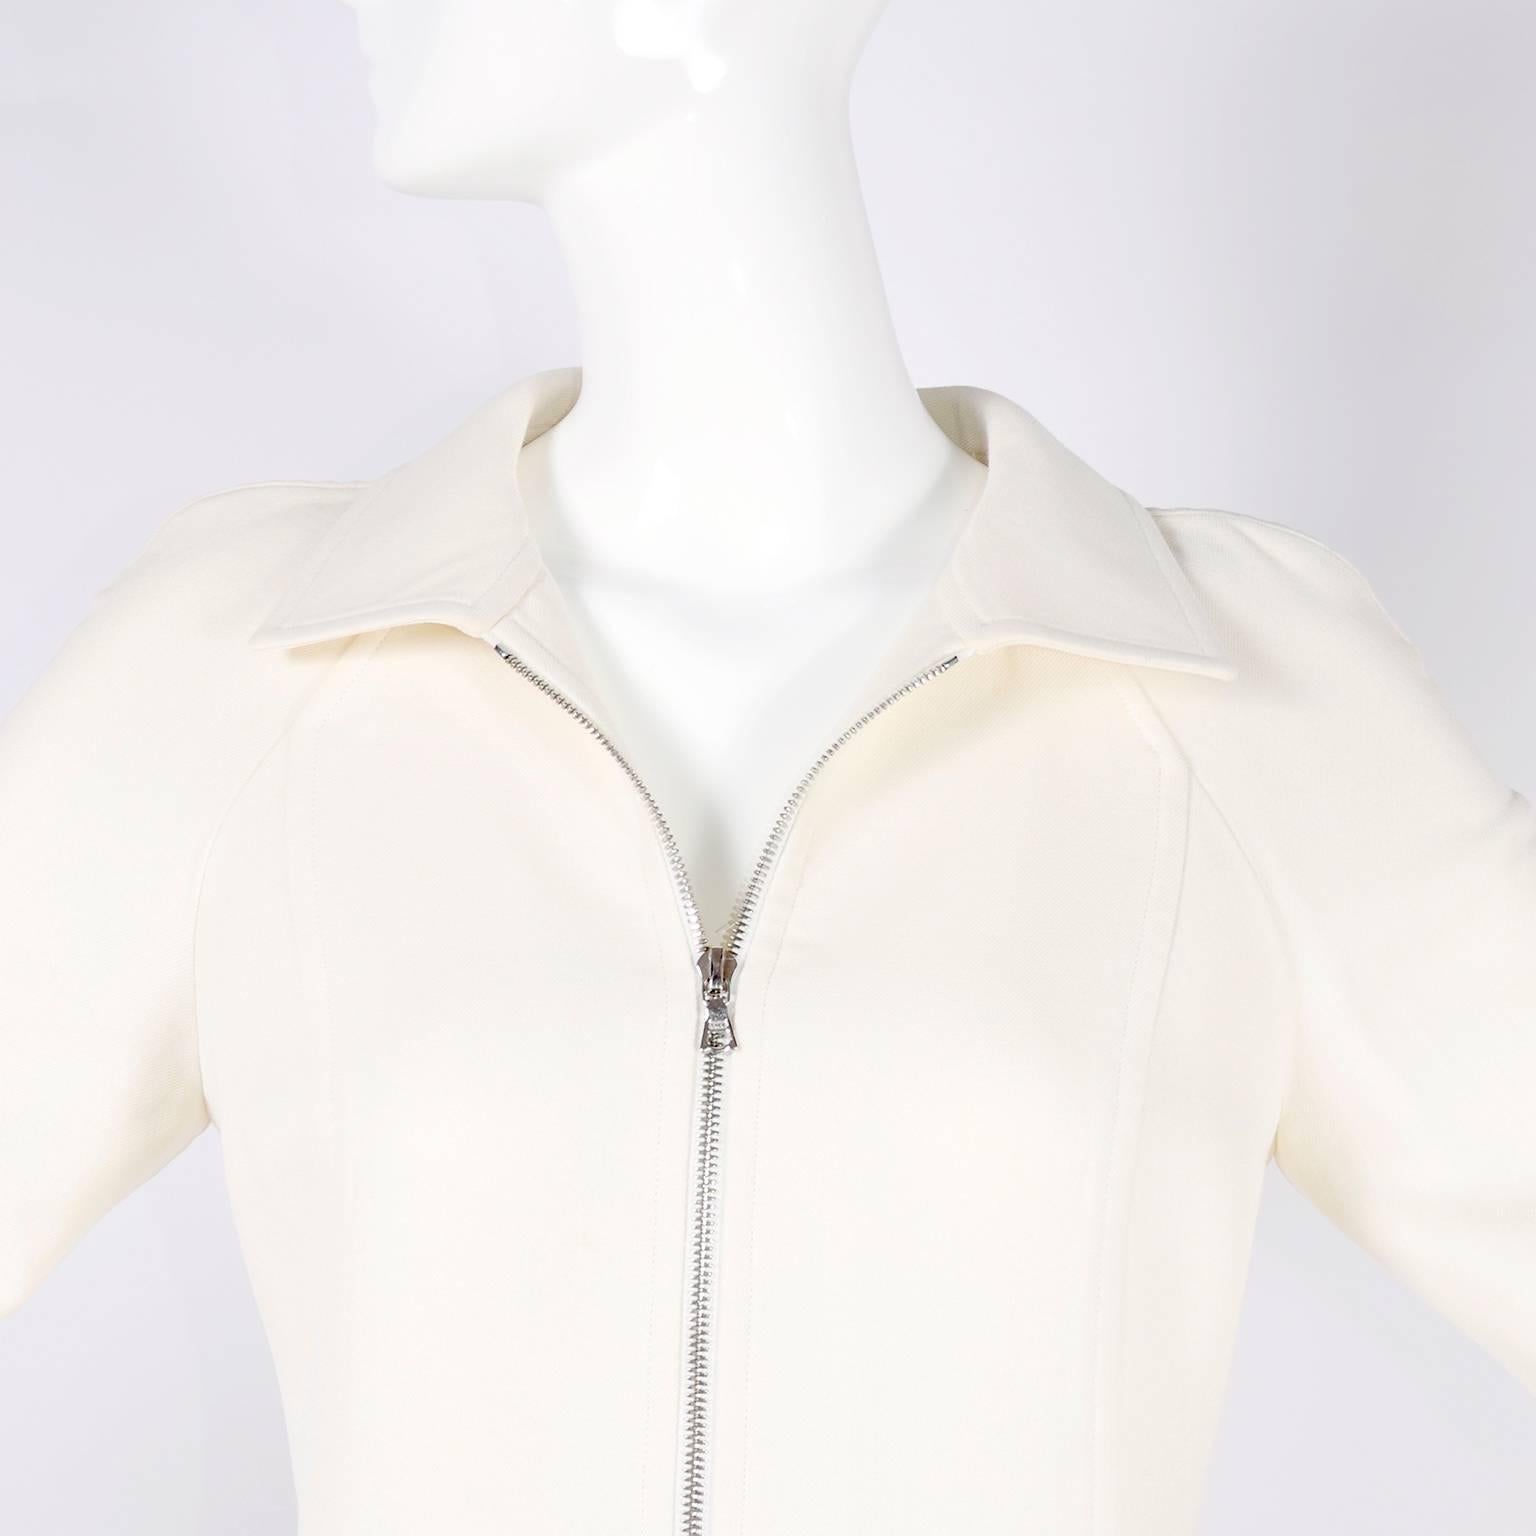 This is a beautiful Courreges coat that zips up the front and has two zip front slit pockets. This coat is such a timeless piece and can be worn with so many different pieces in your wardrobe. This coat is made of a beautiful ivory or winter white